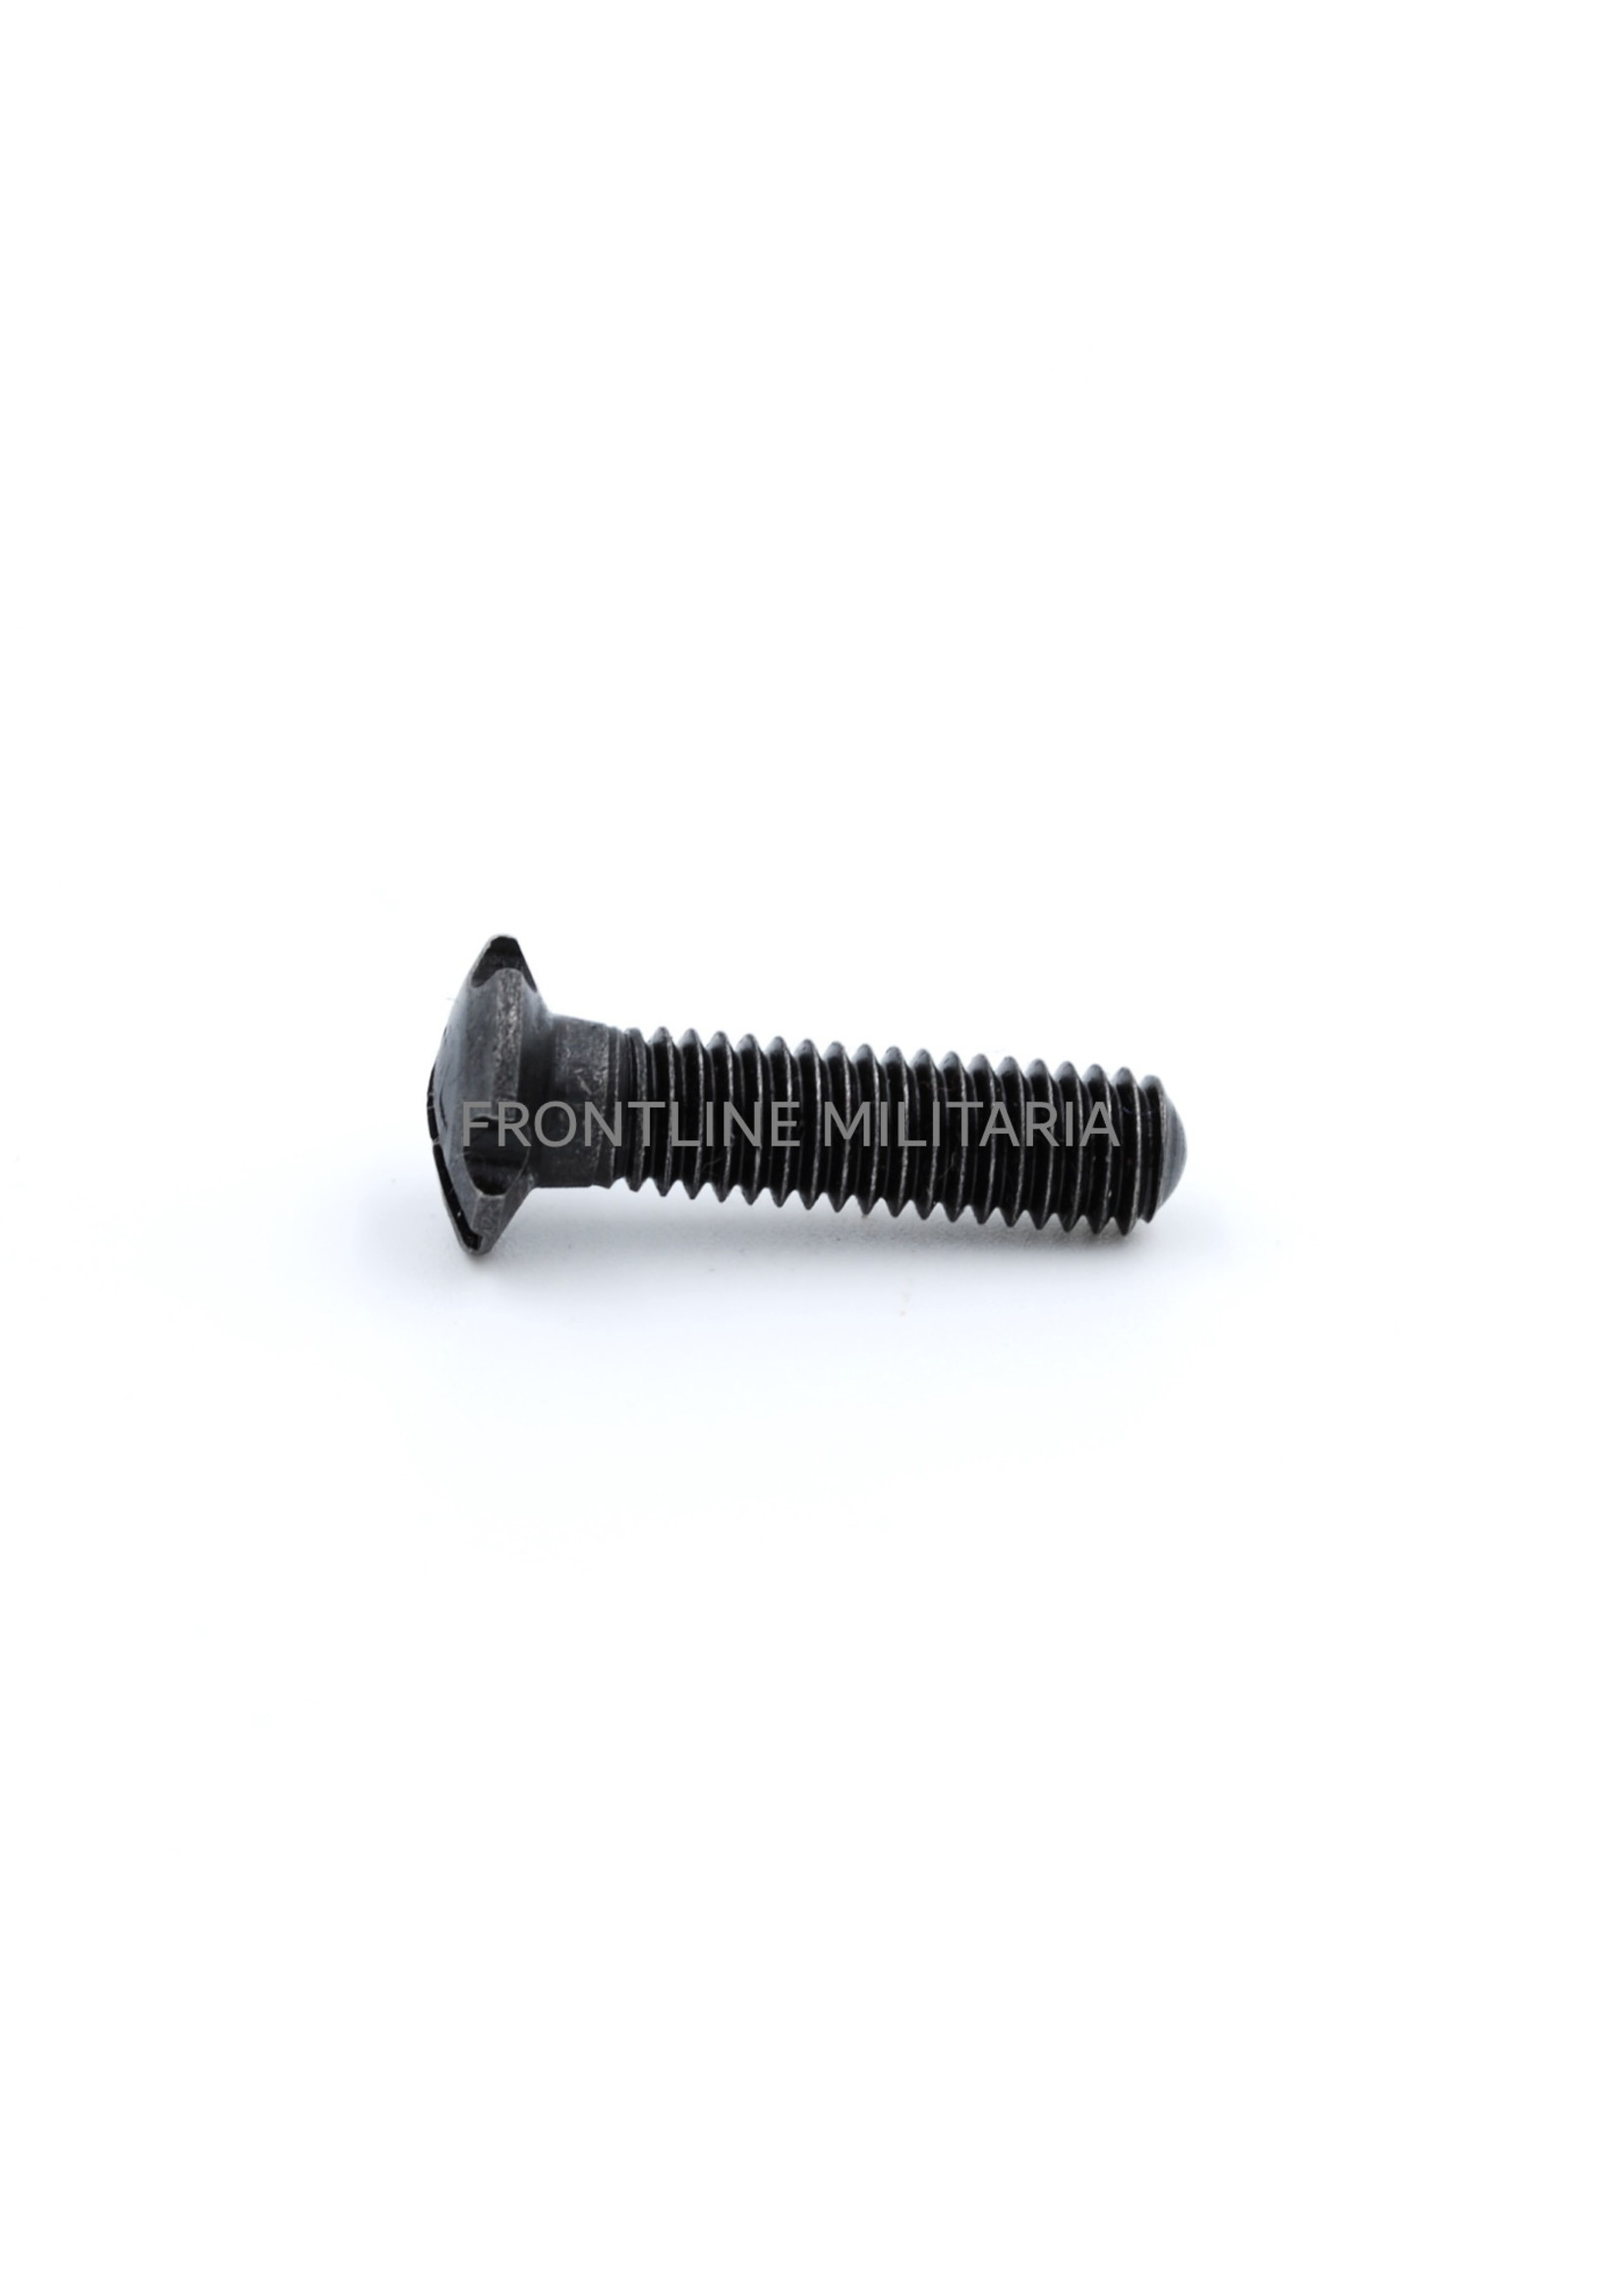 System screw for the G43 and K43 Rifle